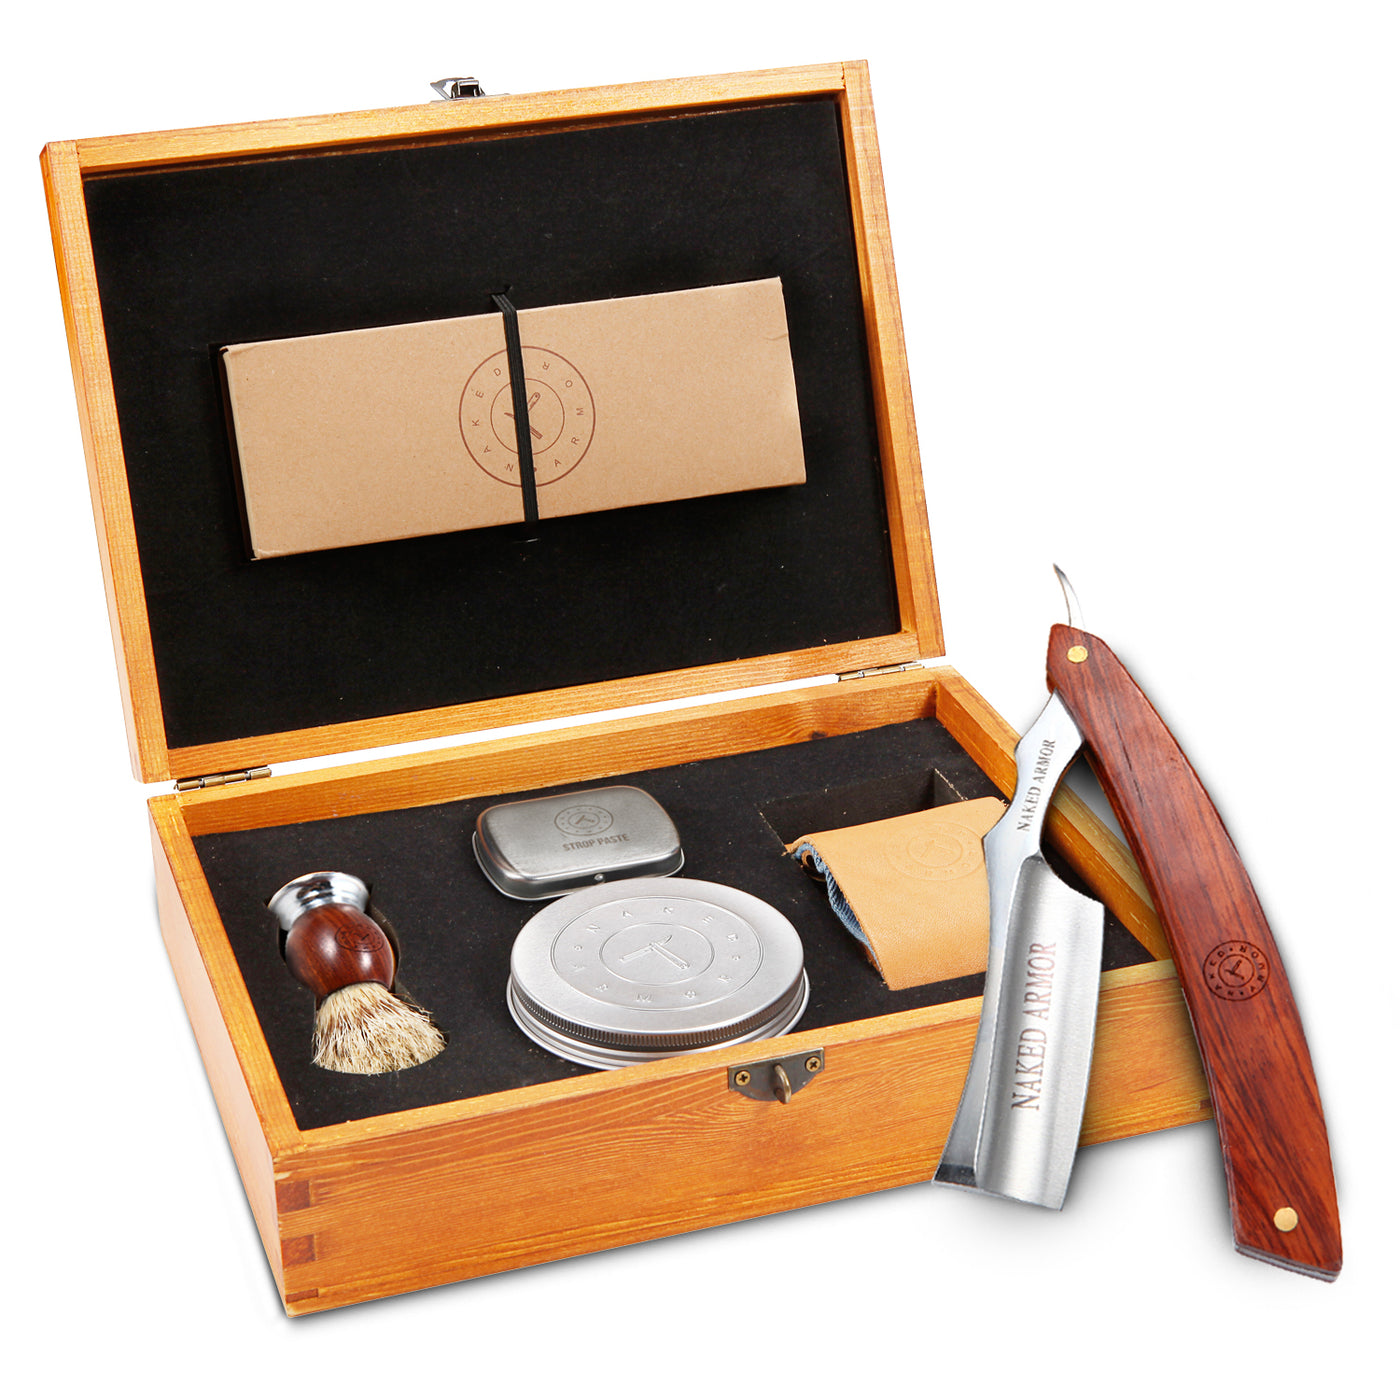  Thor Straight Razor Kit by Naked Armor sold by Naked Armor Razors